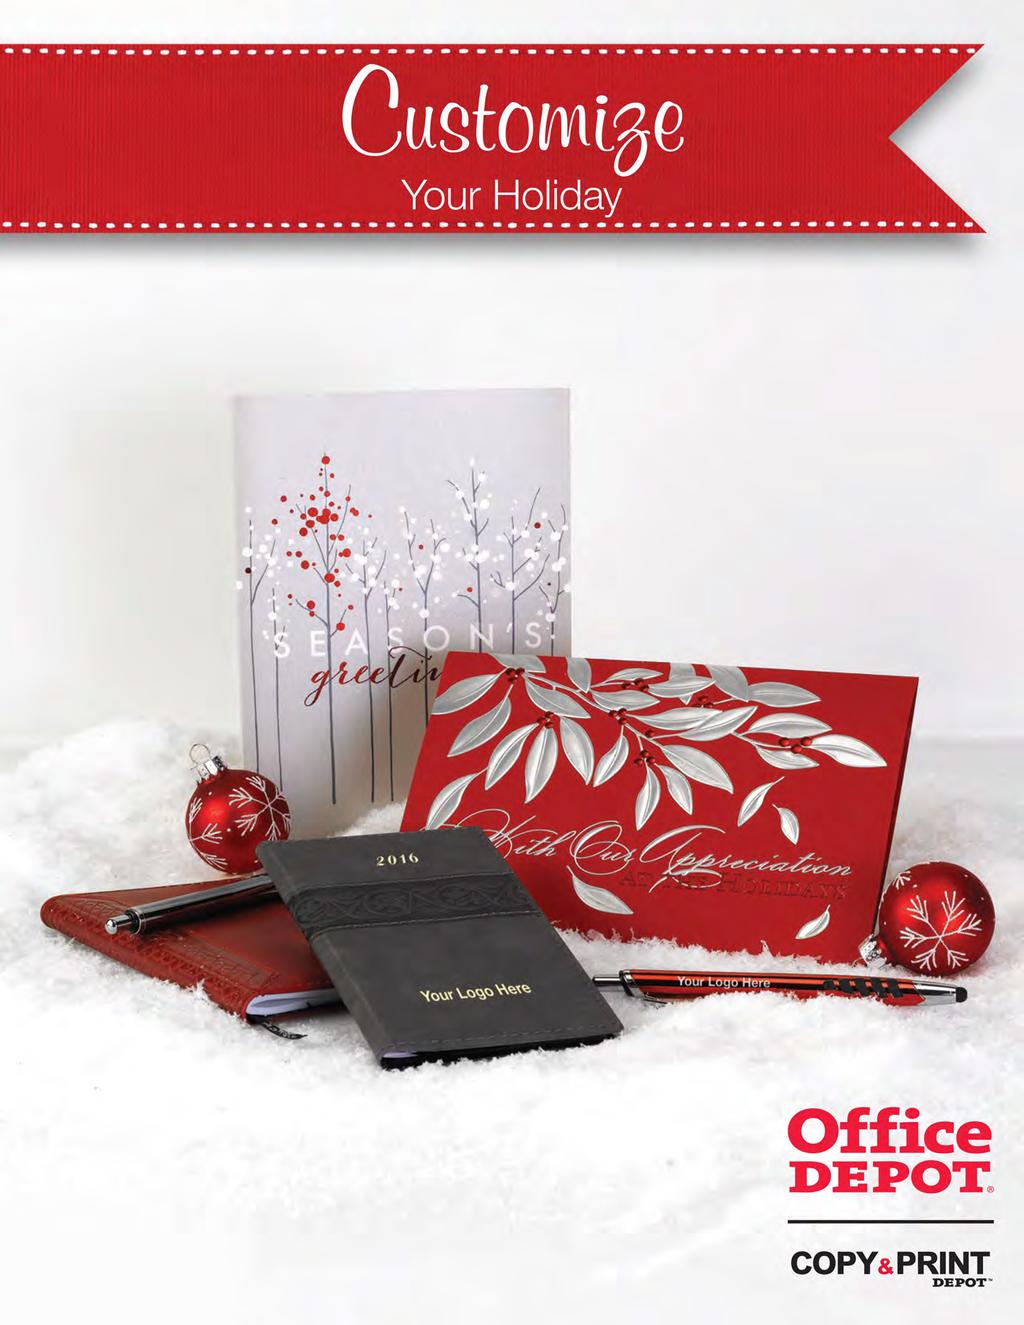 Big Savings on These Featured Items! Available Only on business.officedepot.